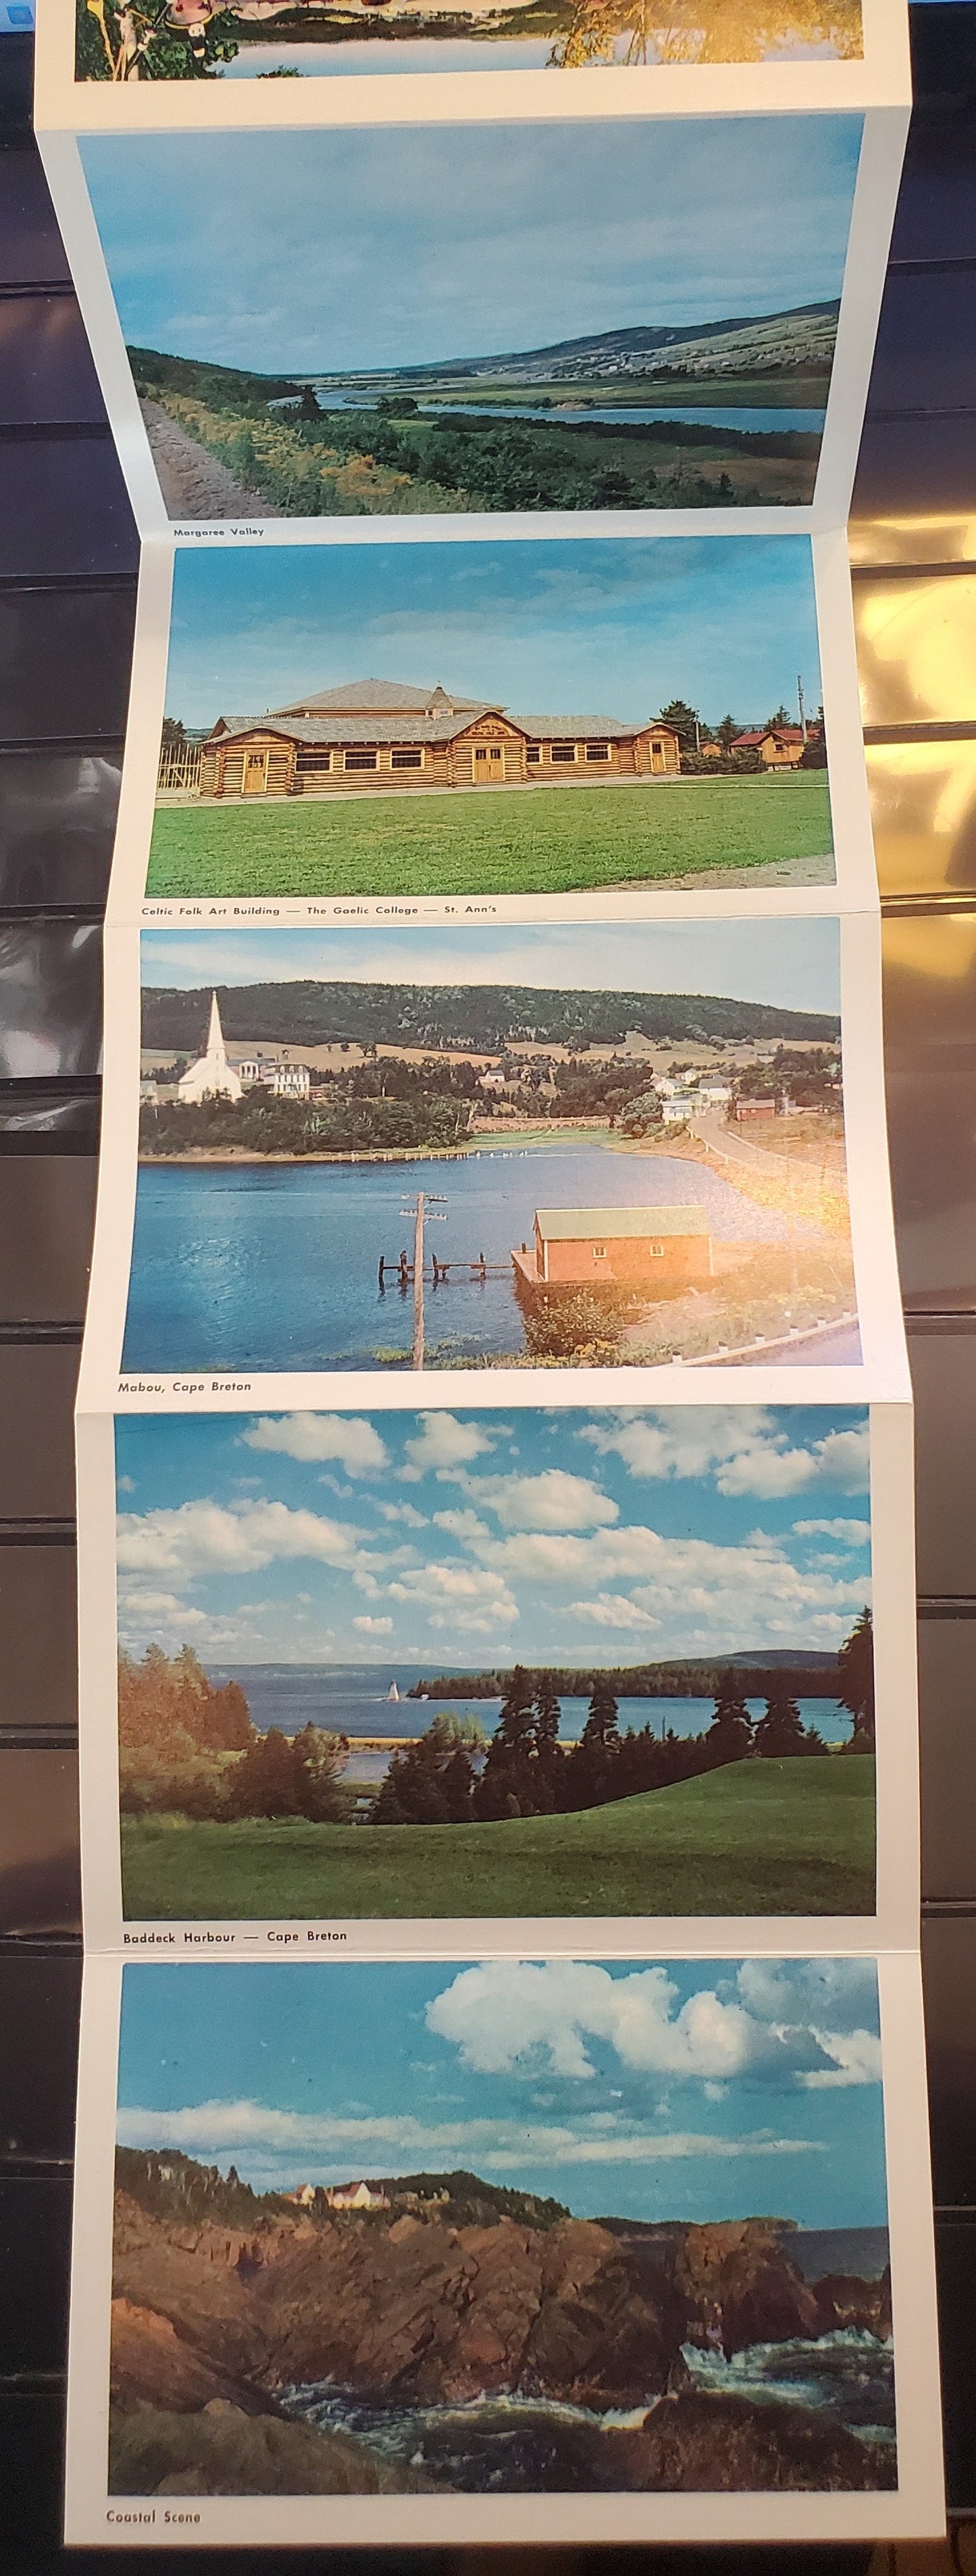 A Group of 2 Souvenir Postcard Folders From Cape Breton, Nova Scotia, Showing Various Scenic Views, From The 1960's, Overall VF, Net Est. $10